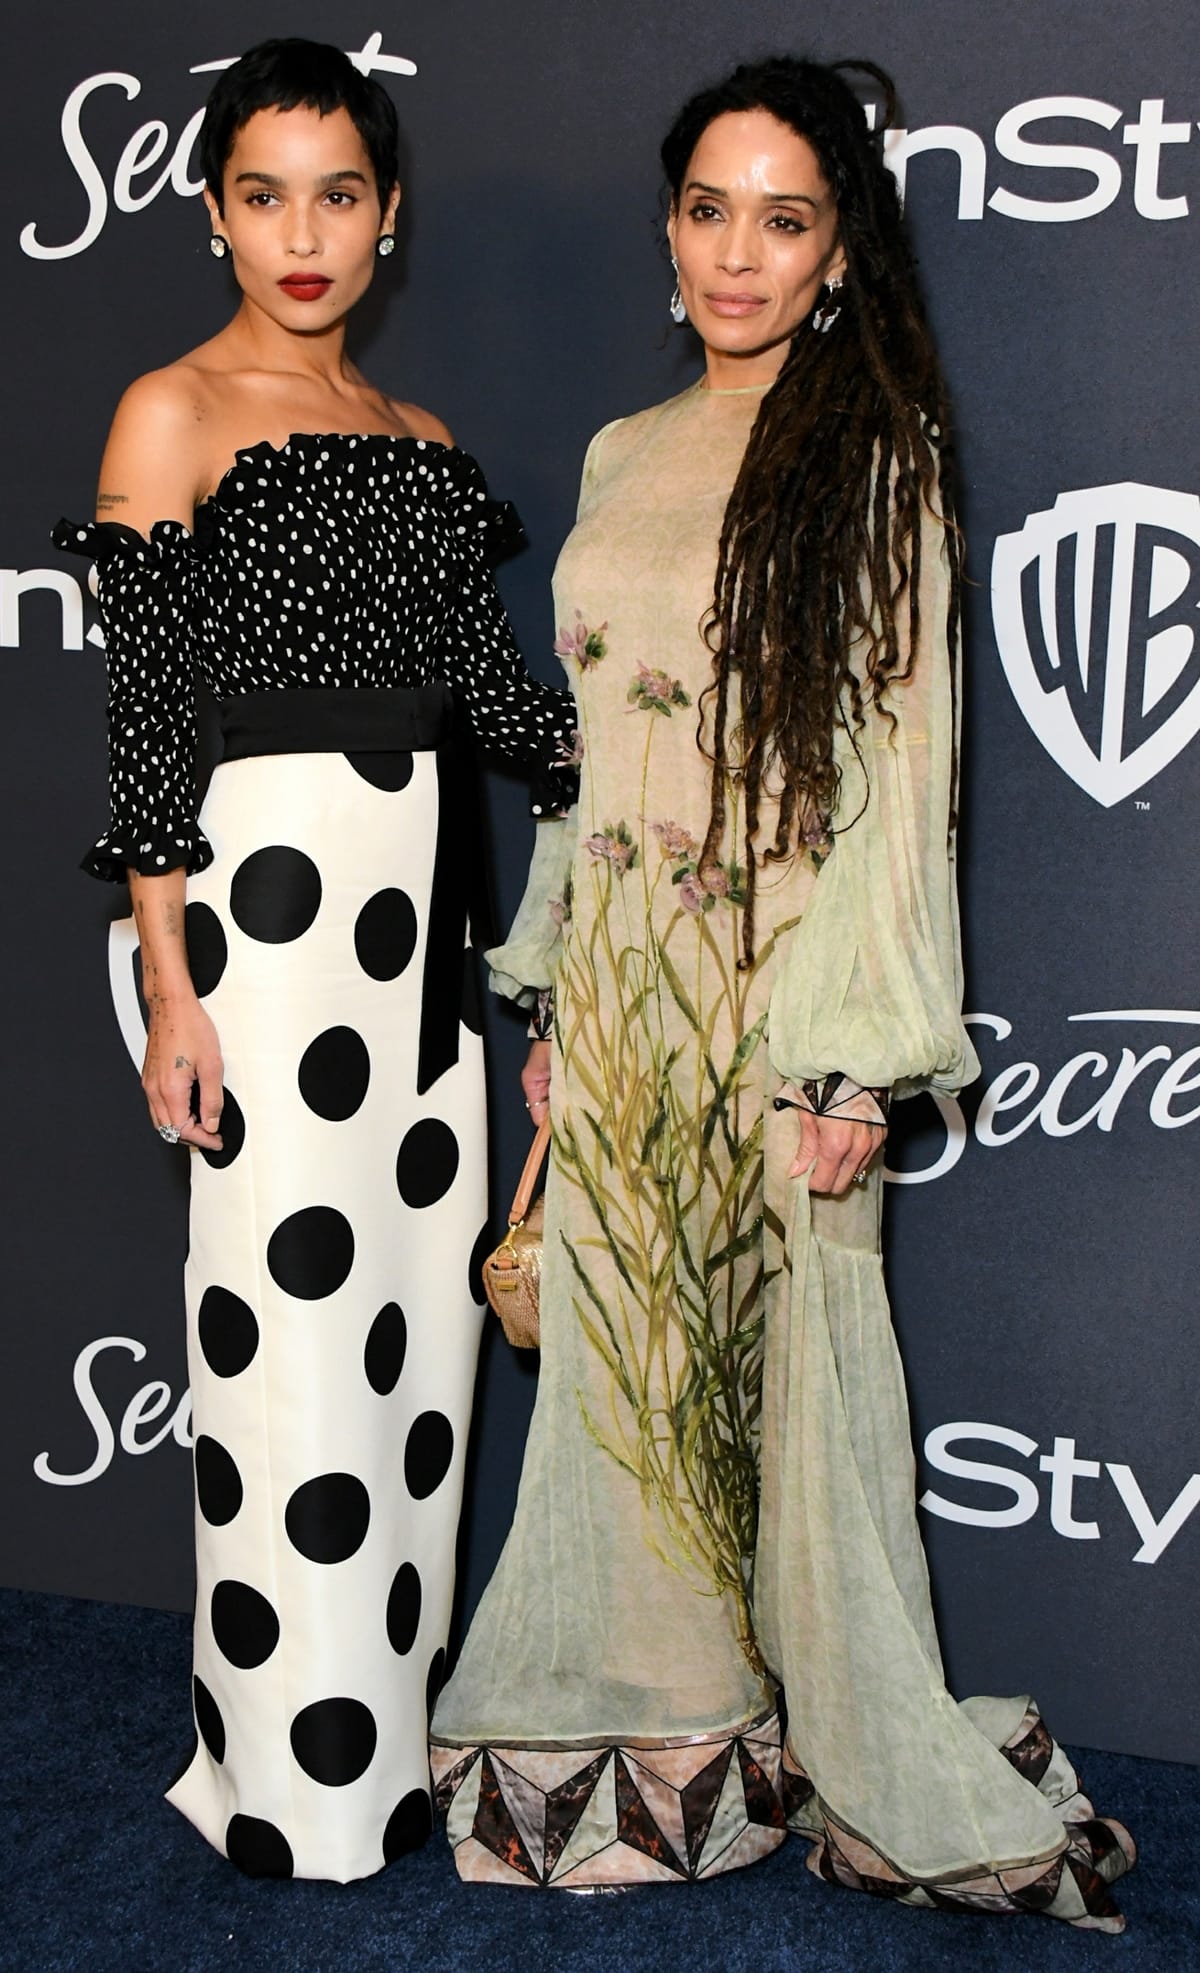 Lisa Bonet and Zoë Kravitz, showcasing pretty identical heights, attended the 21st Annual Warner Bros. And InStyle Golden Globe After Party at The Beverly Hilton Hotel on January 05, 2020, in Beverly Hills, California